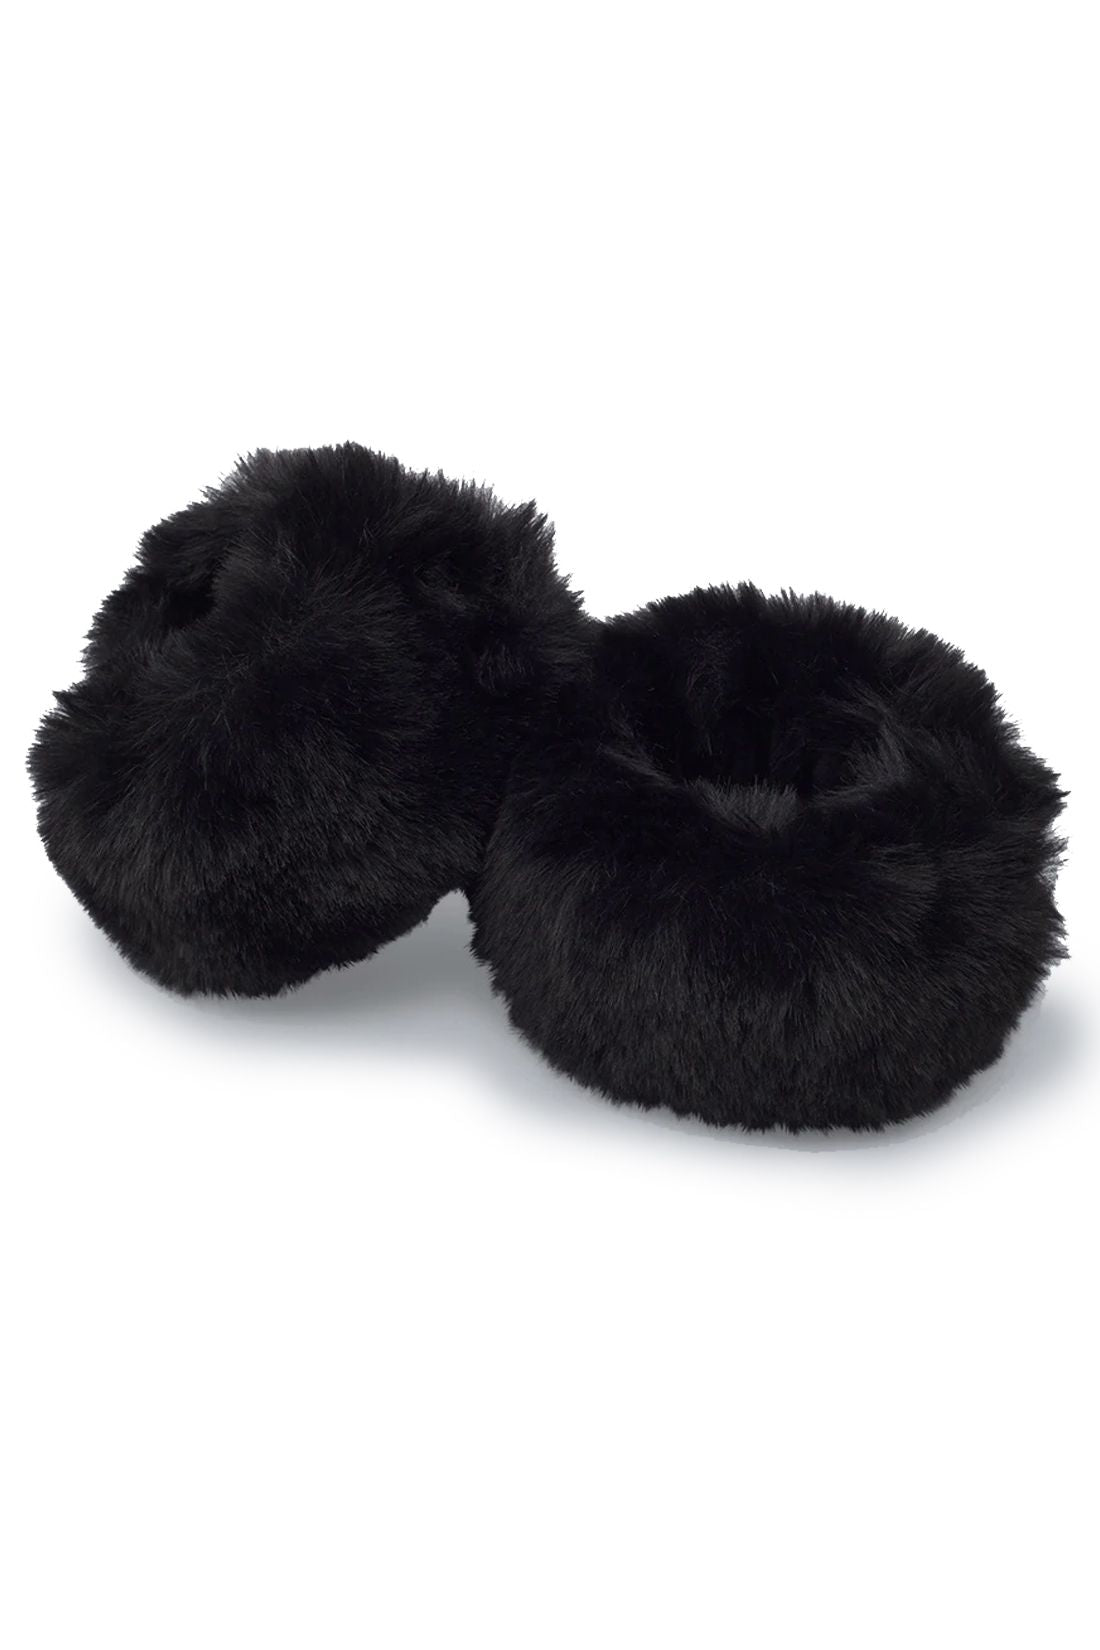 Johnathan Kayne J3 is a Lush Fur Cuff available in Black or White to add a touch of Glam to any formal Gown or event! Wear these around your arm/wrist to complete any look! Available in Black or White!